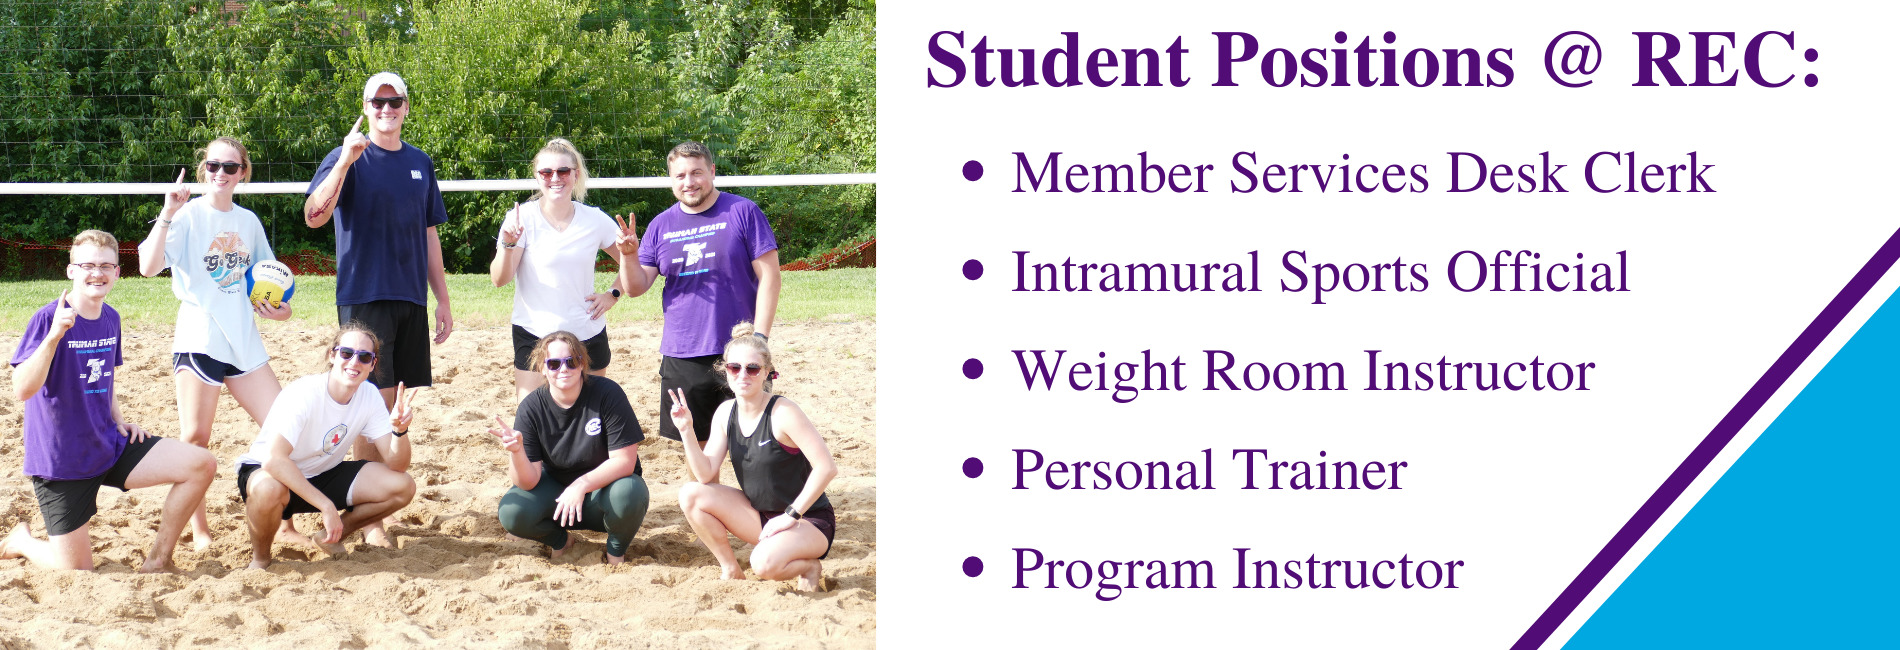 Student Positions at the REC